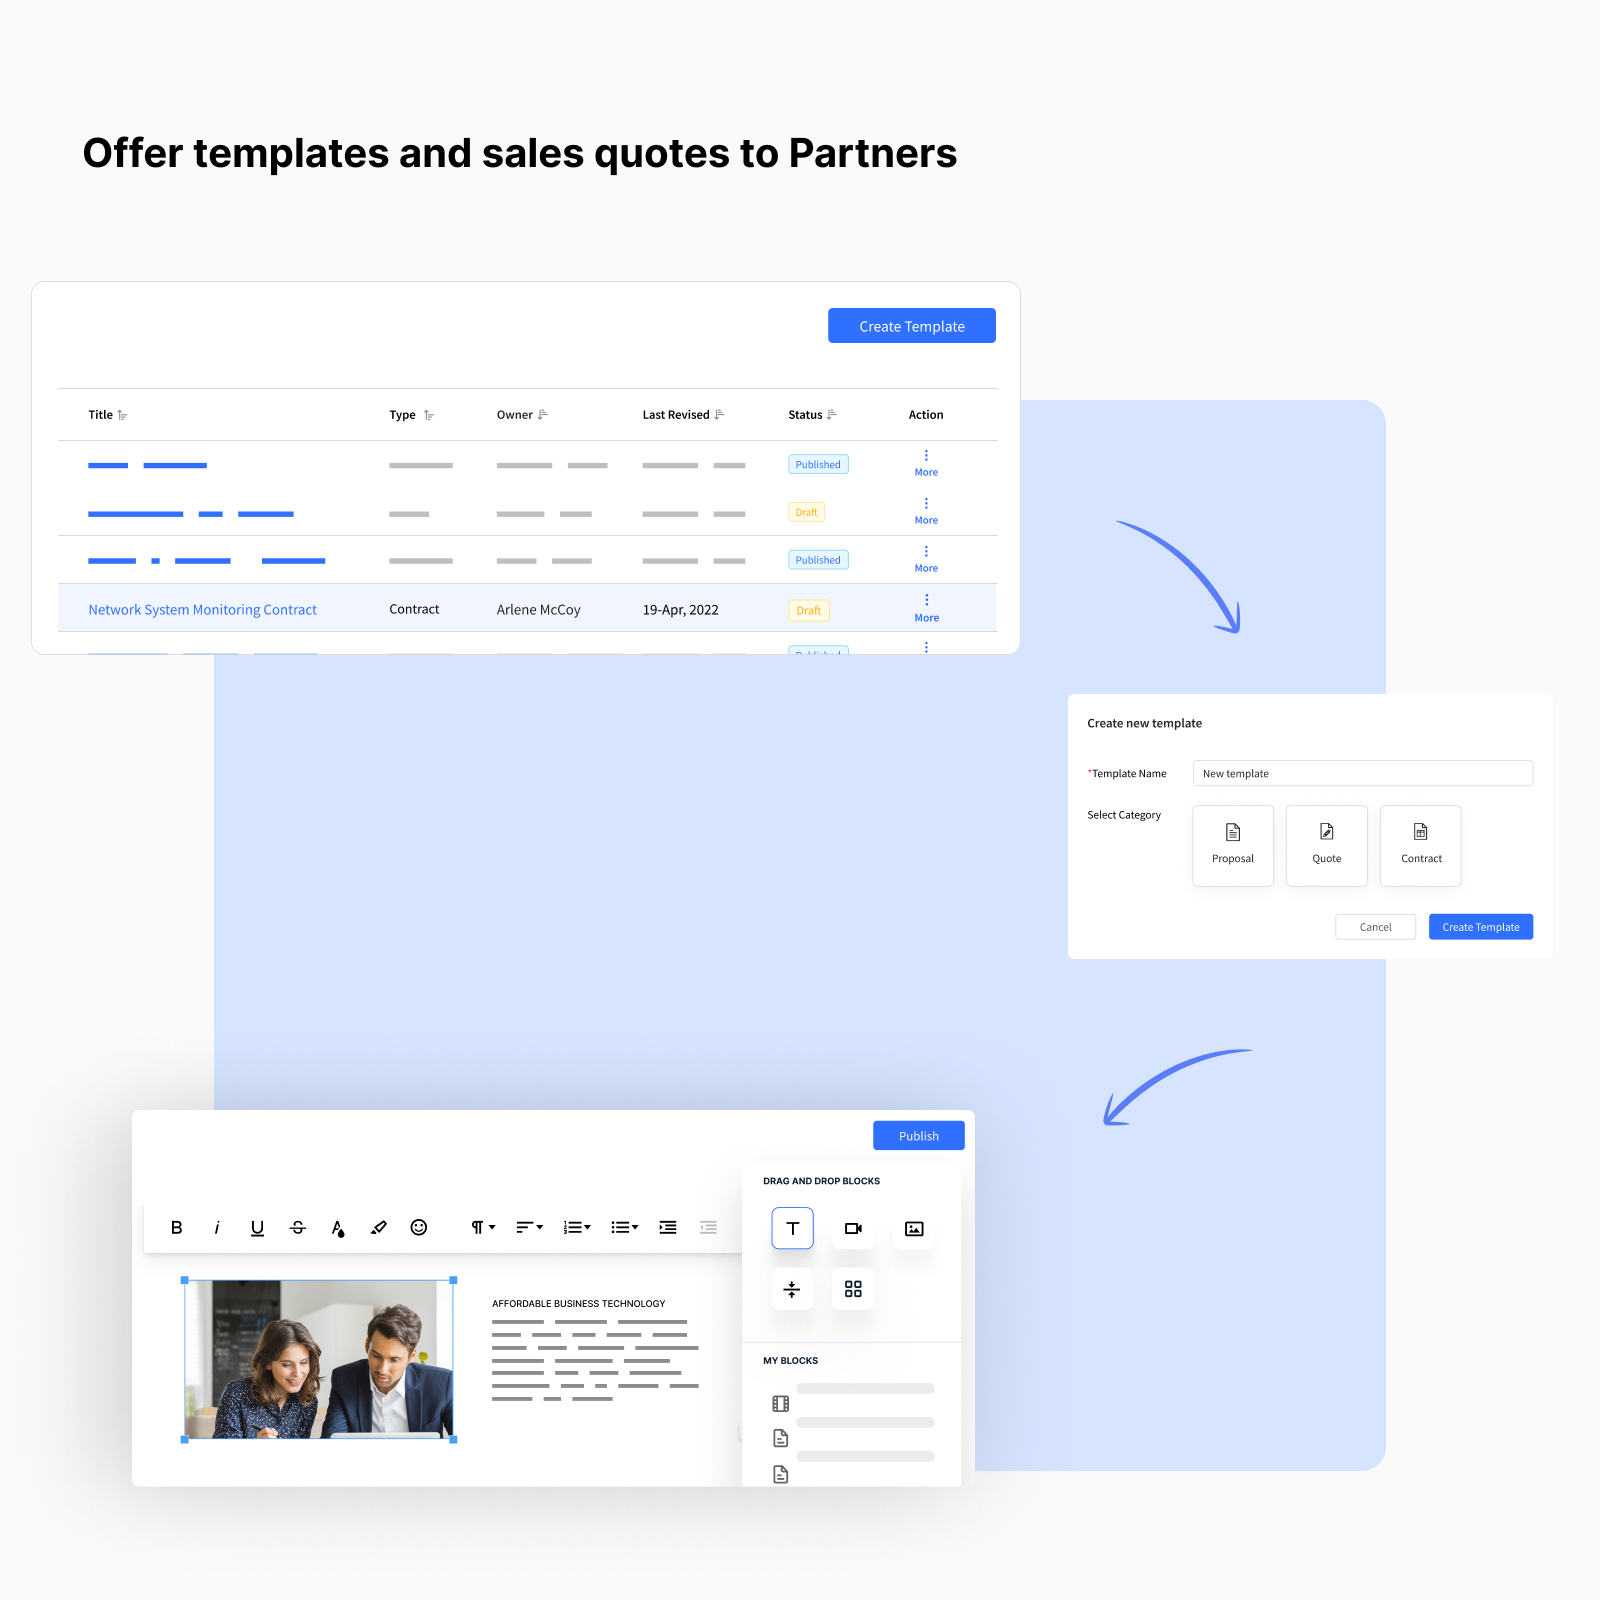 Offer templates and sales quotes to Partners